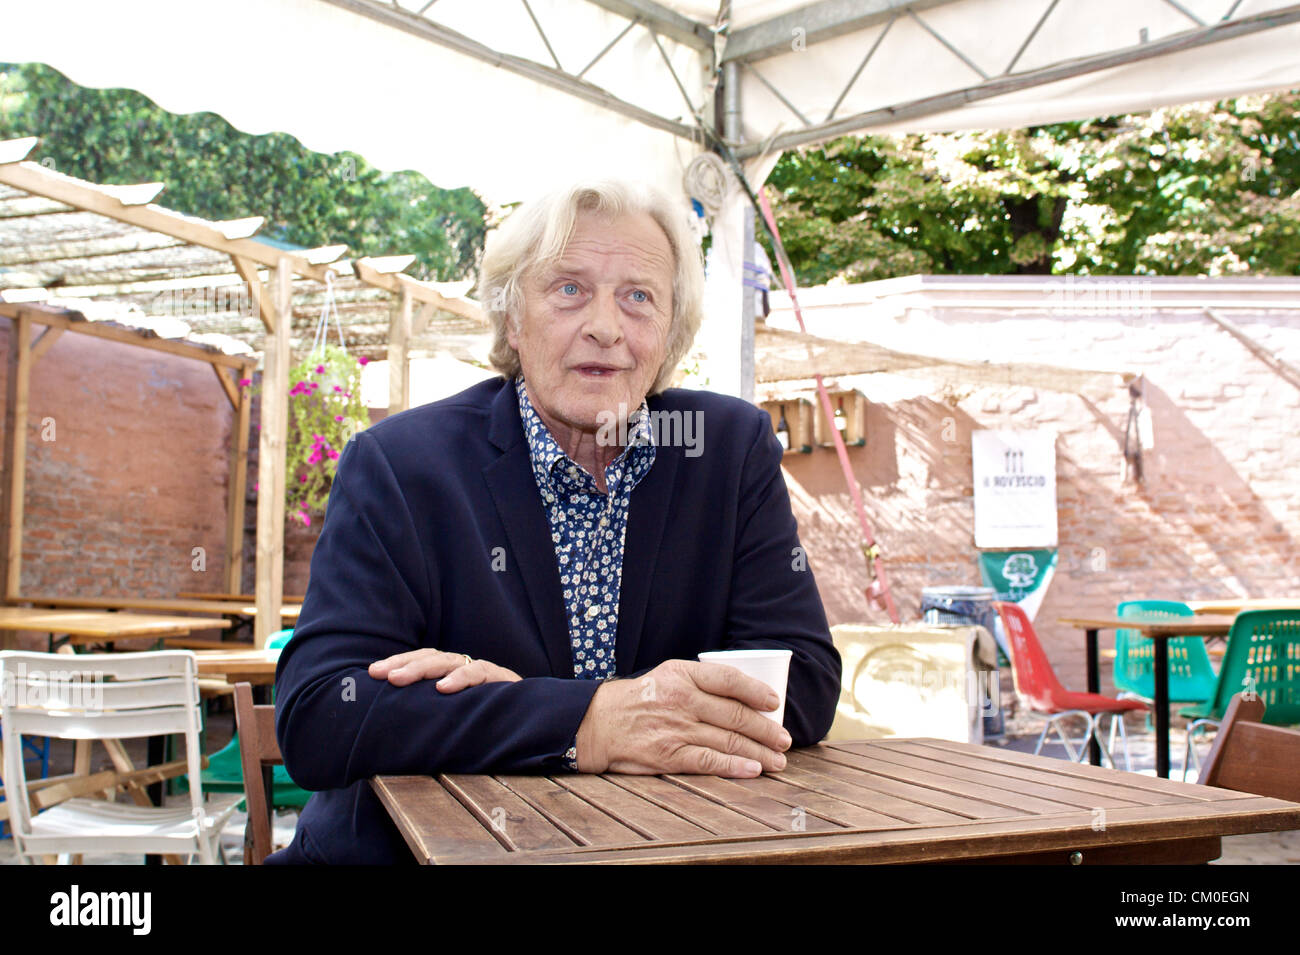 BOLOGNA, ITALY - SEP 08: Rutger Hauer [Actor] having a free talk with Young movie maker at the Cineteca in Bologna, Italy on Sep 08, 2012. Stock Photo